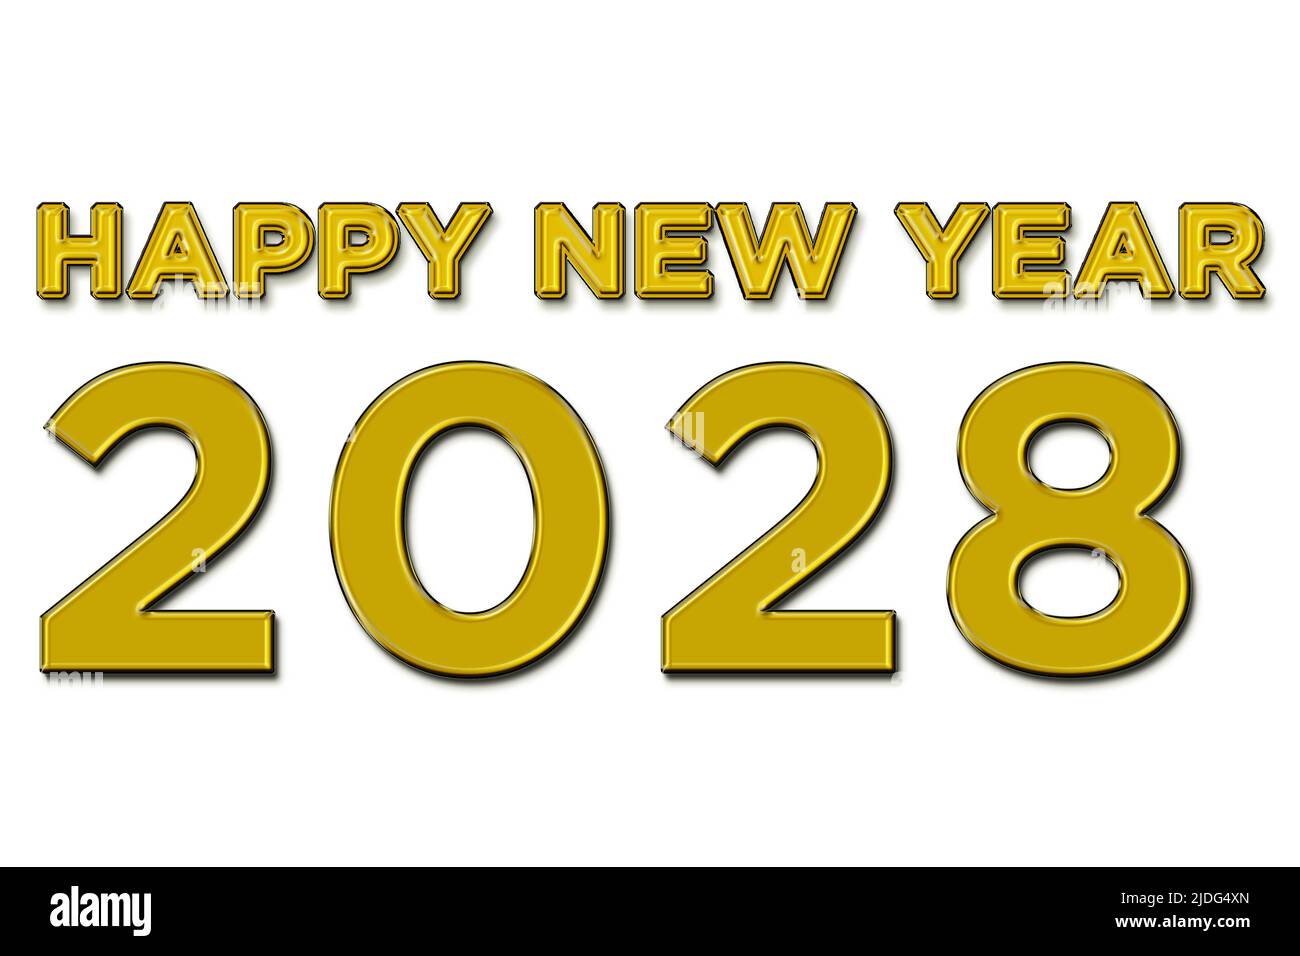 Happy new year 2028 illustration in yellow color text on white background Stock Photo